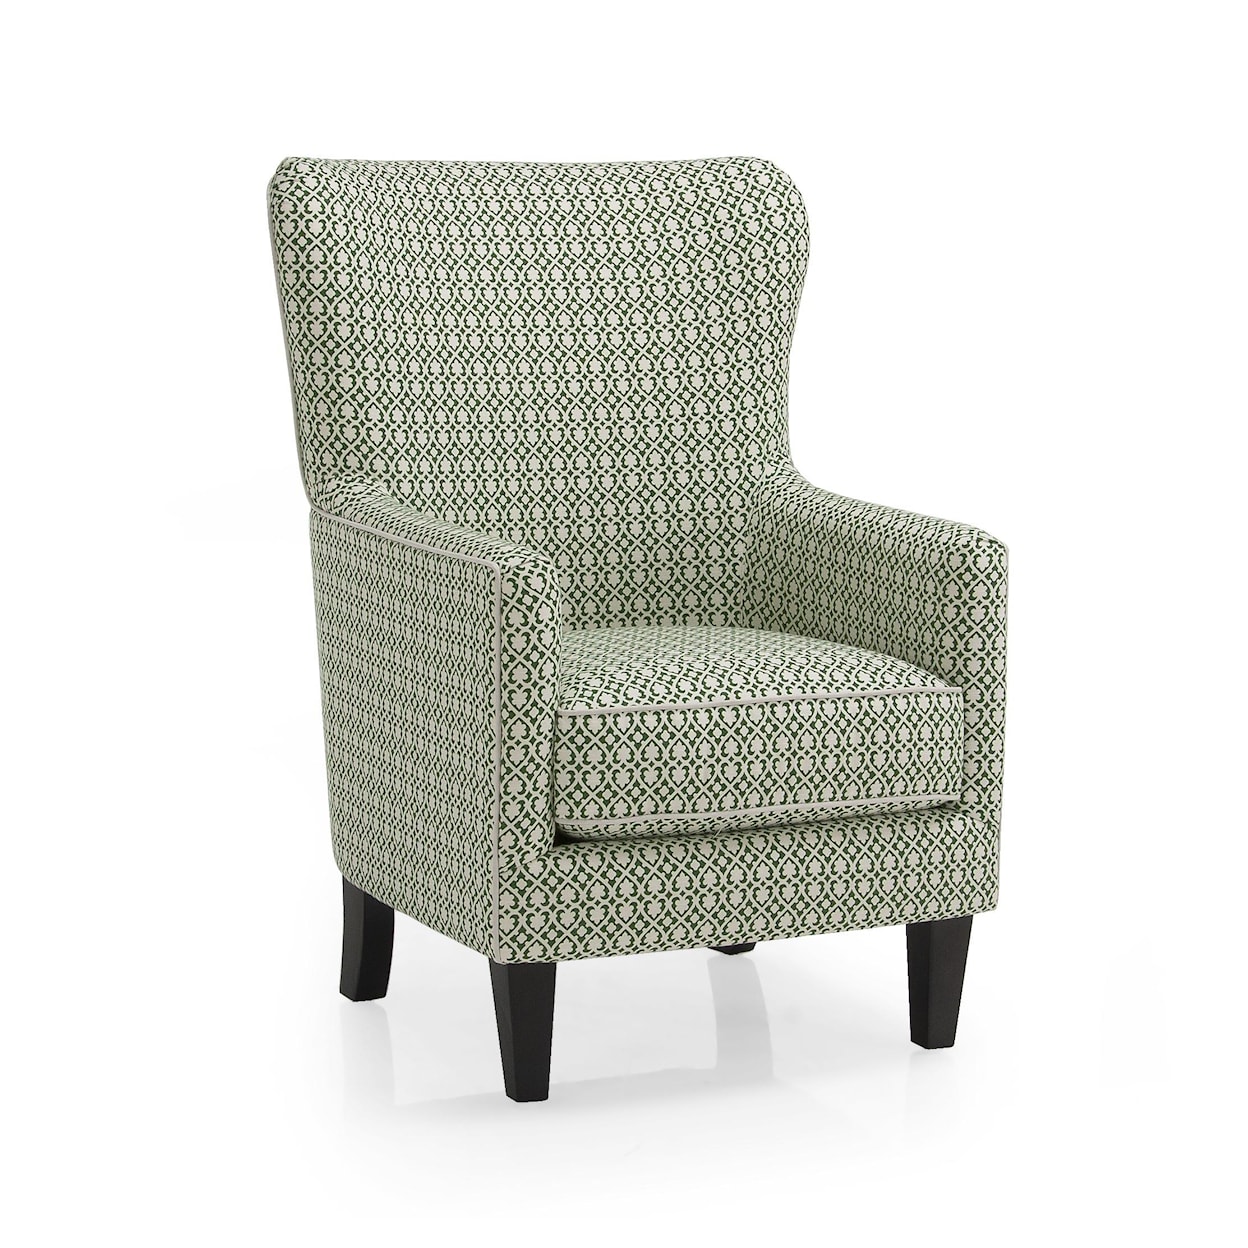 Taelor Designs 2379 Contemporary Wing Back Chair